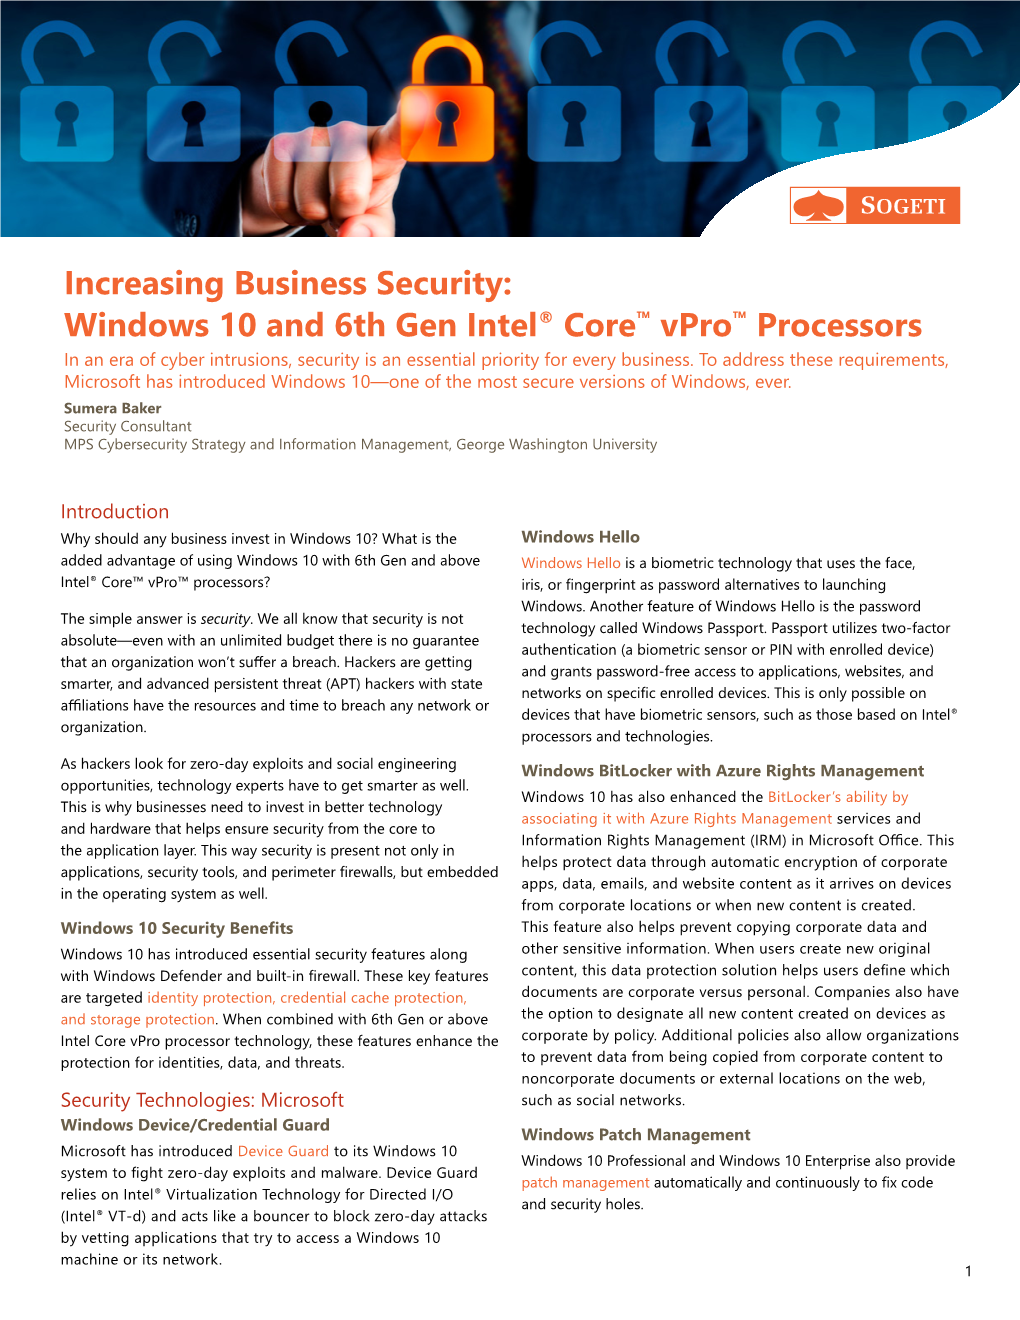 Increasing Business Security: Windows 10 and 6Th Gen Intel® Core™ Vpro™ Processors in an Era of Cyber Intrusions, Security Is an Essential Priority for Every Business